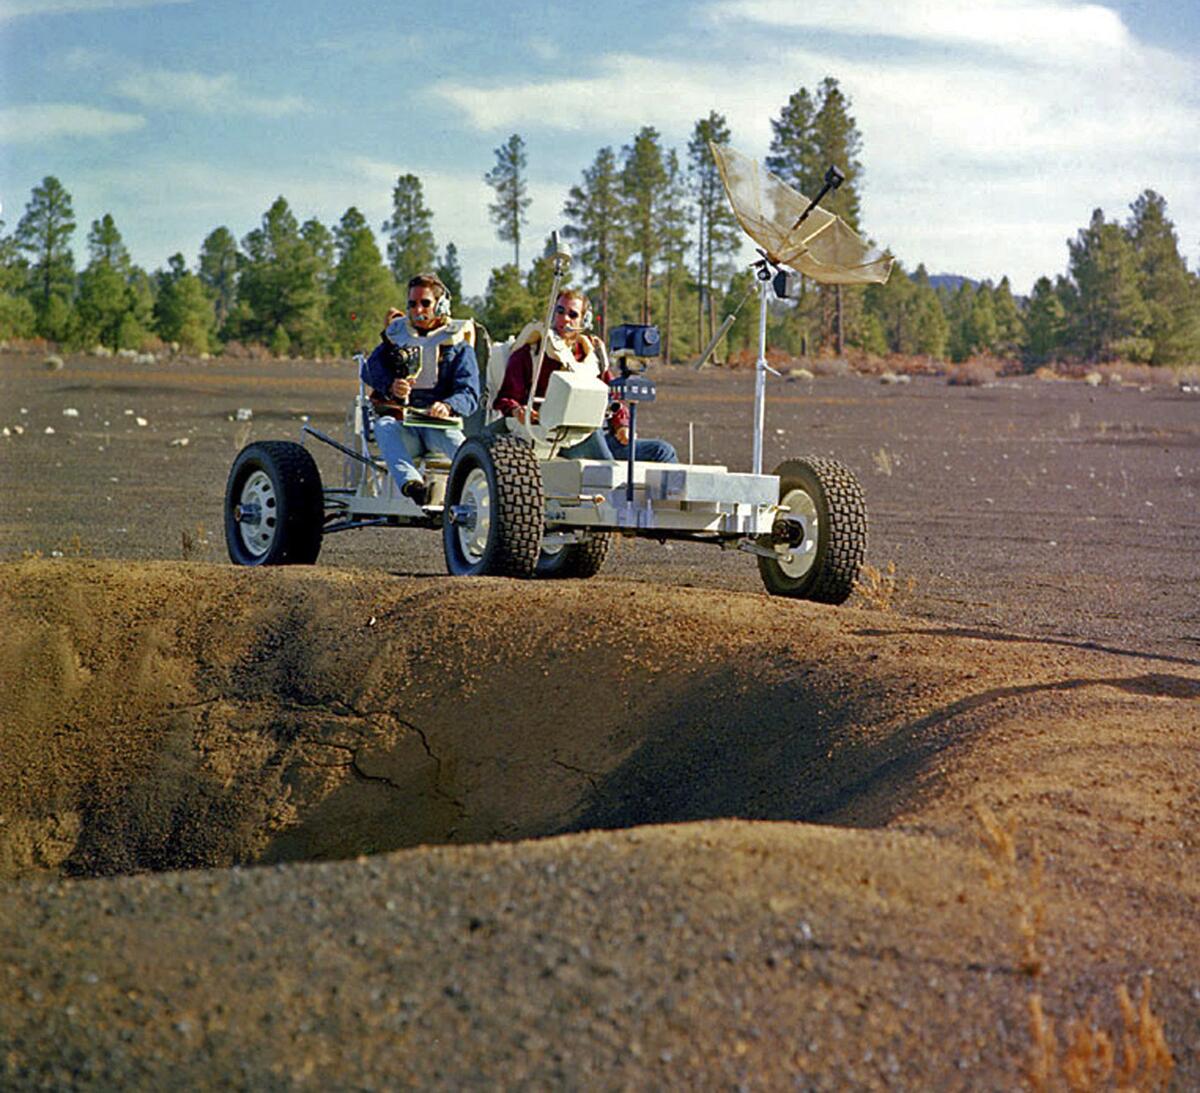 Apollo 15 astronauts Jim Irwin, left, and David Scott drive a prototype of a lunar rover in a volcanic cinder field east of Flagstaff, Ariz. Geology lessons were an important part of the Apollo astronauts' training.